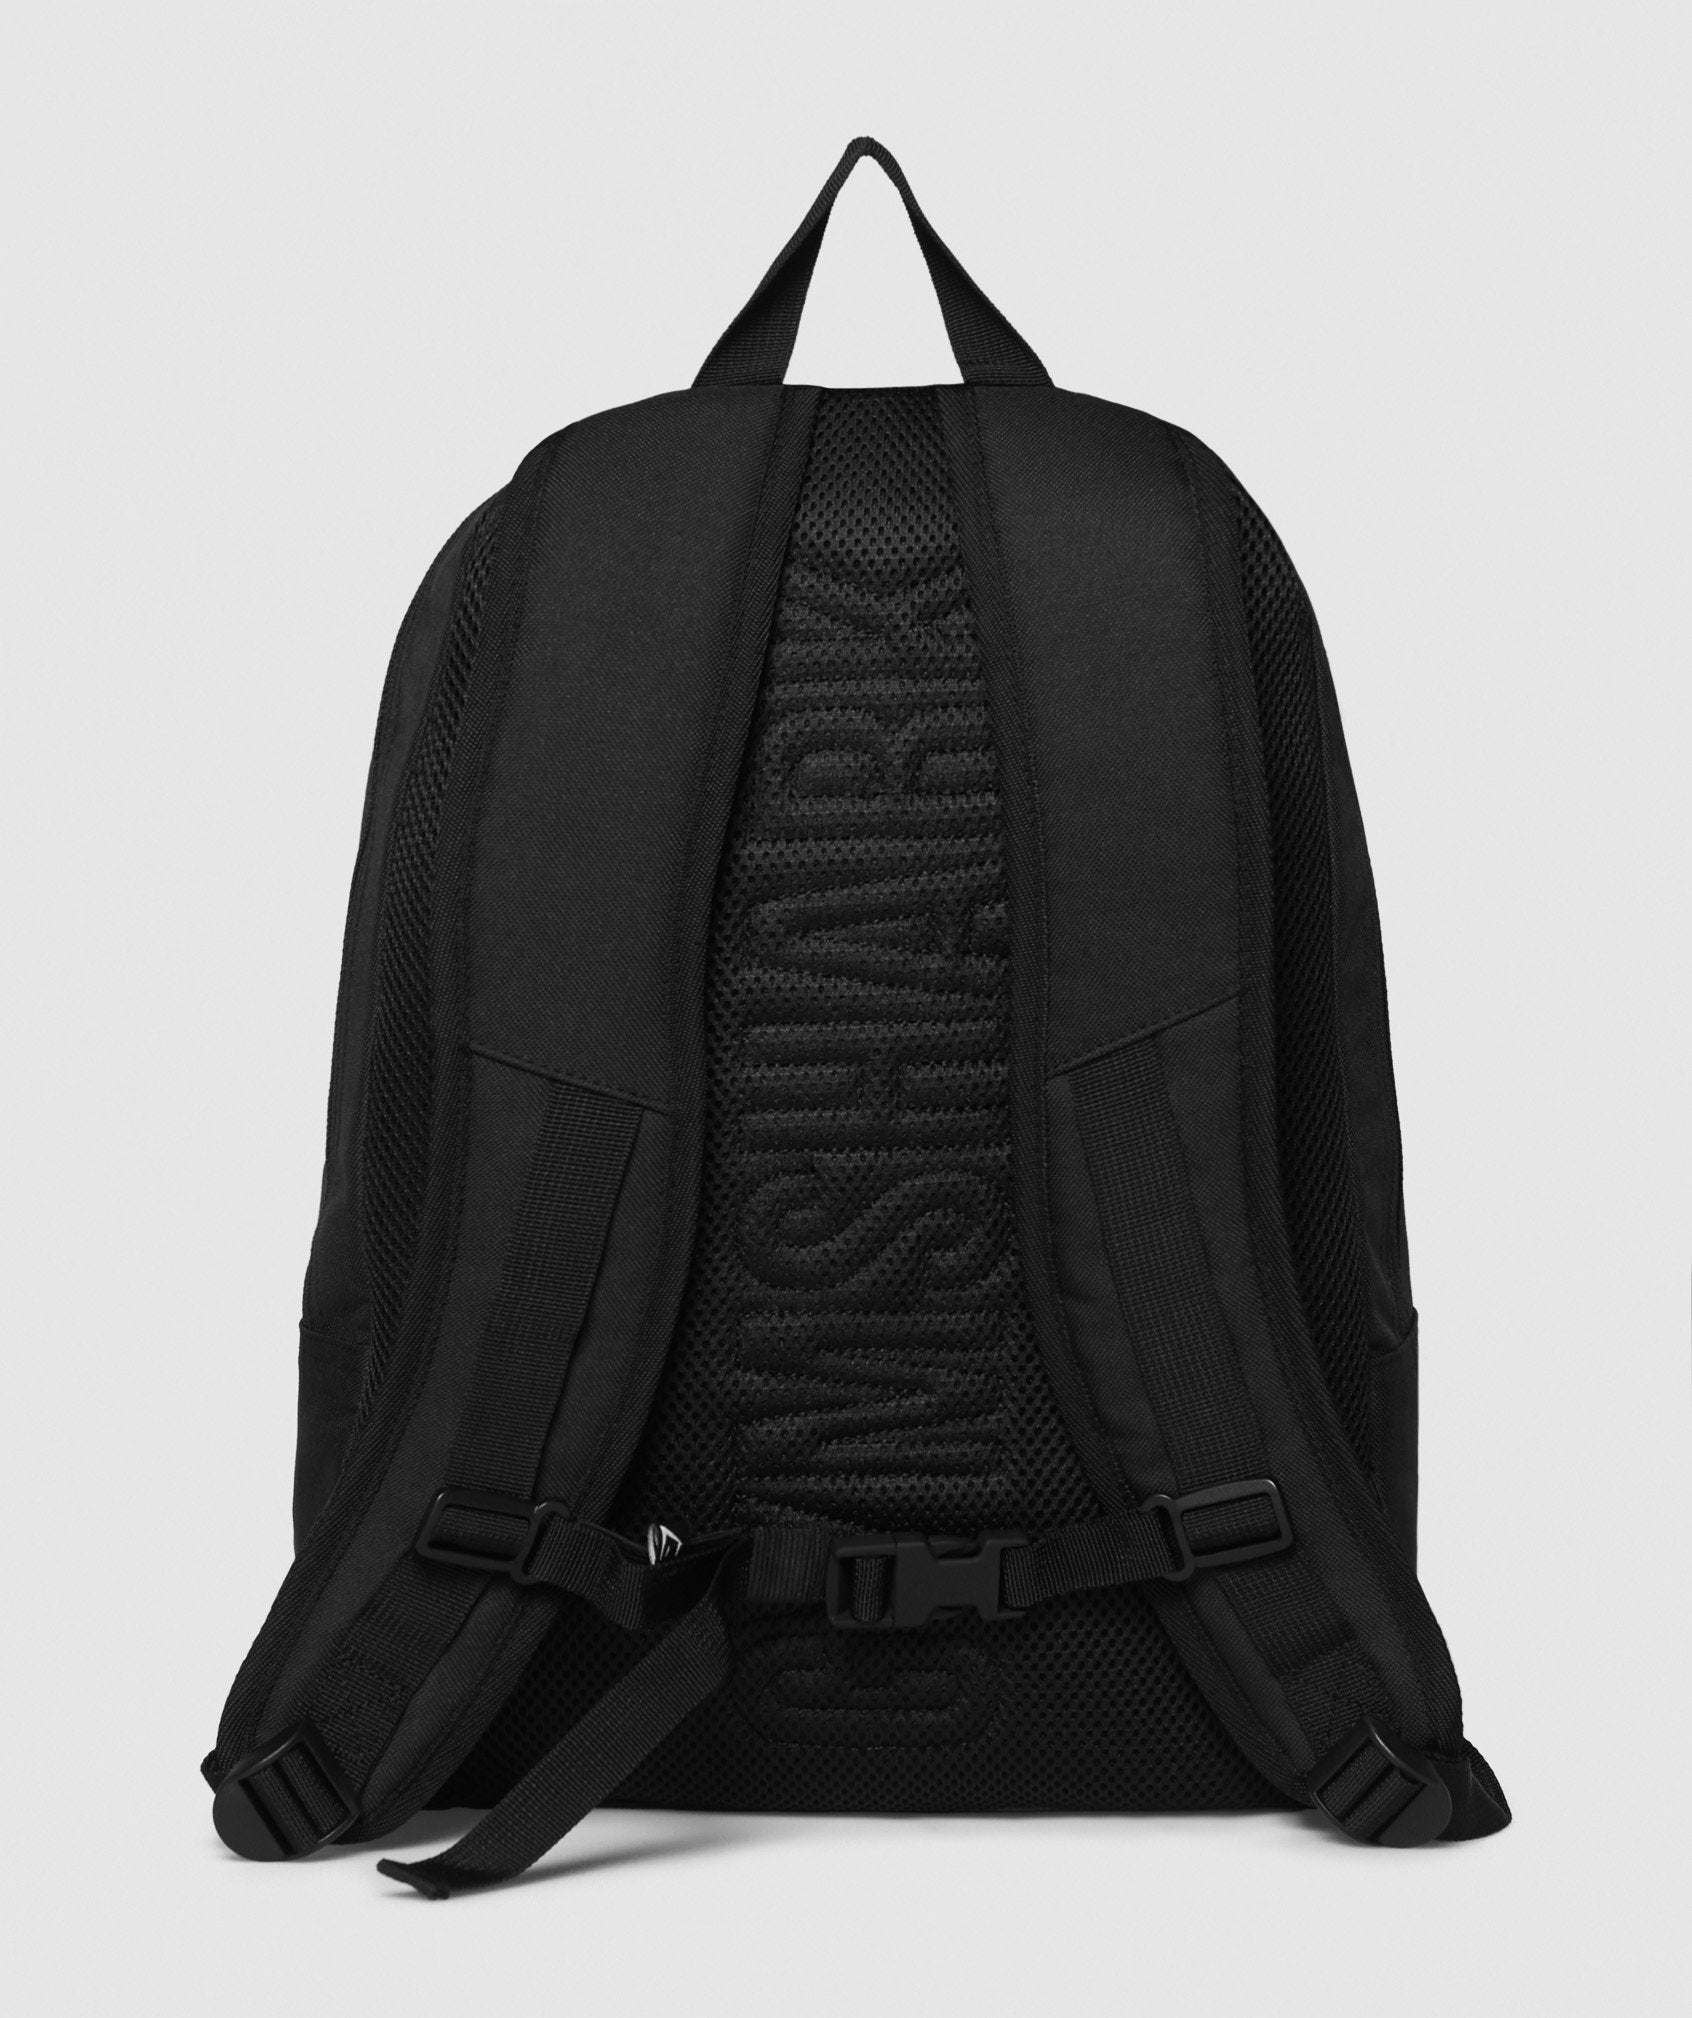 Academy Backpack in Black - view 5